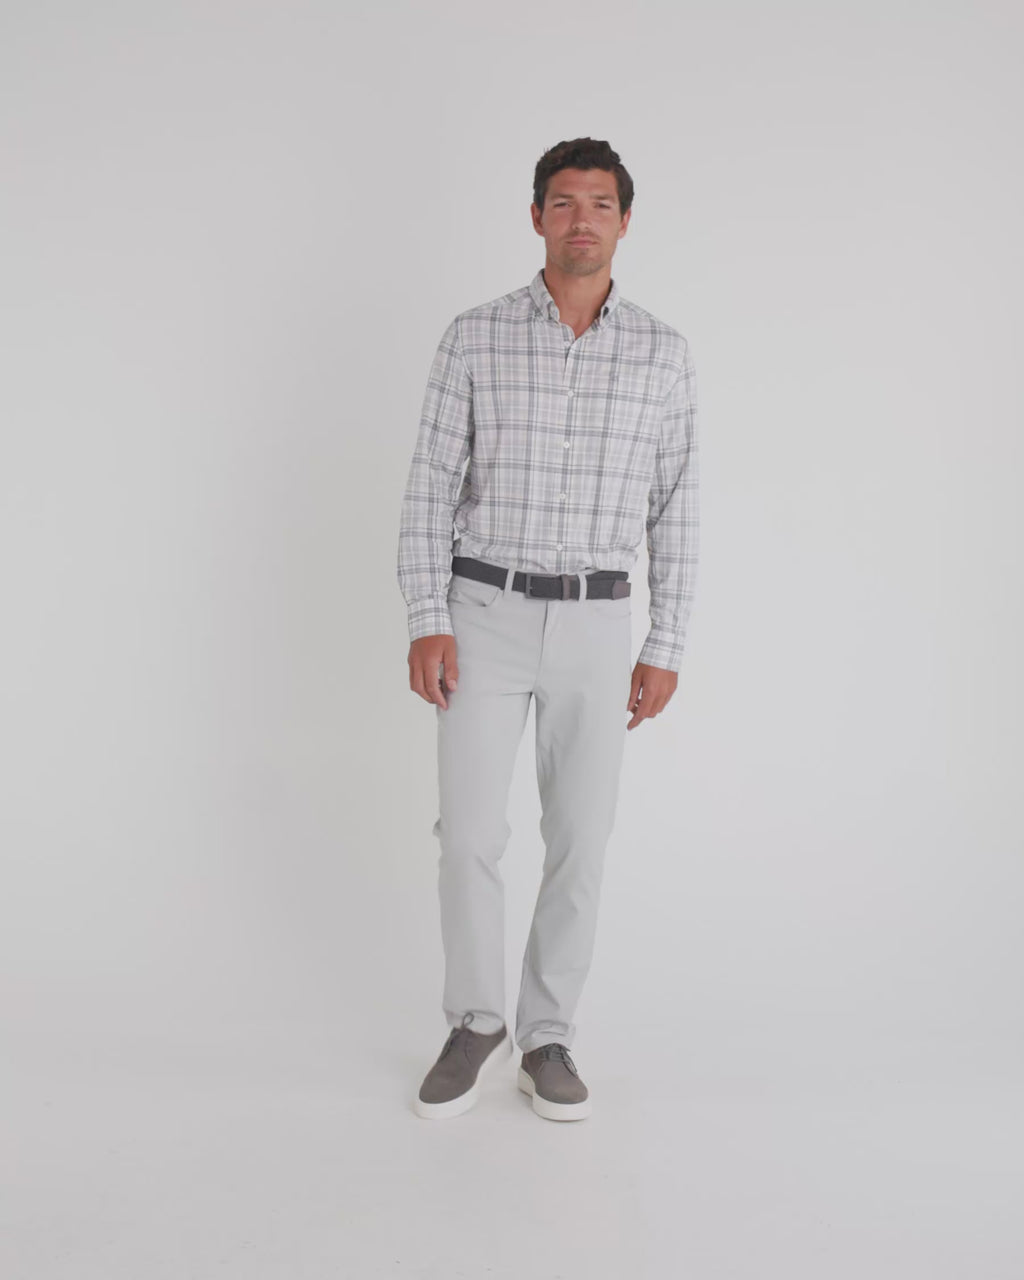 The video view of the Southern Tide Highsmith Plaid Sport Shirt by Southern Tide - Platinum Grey